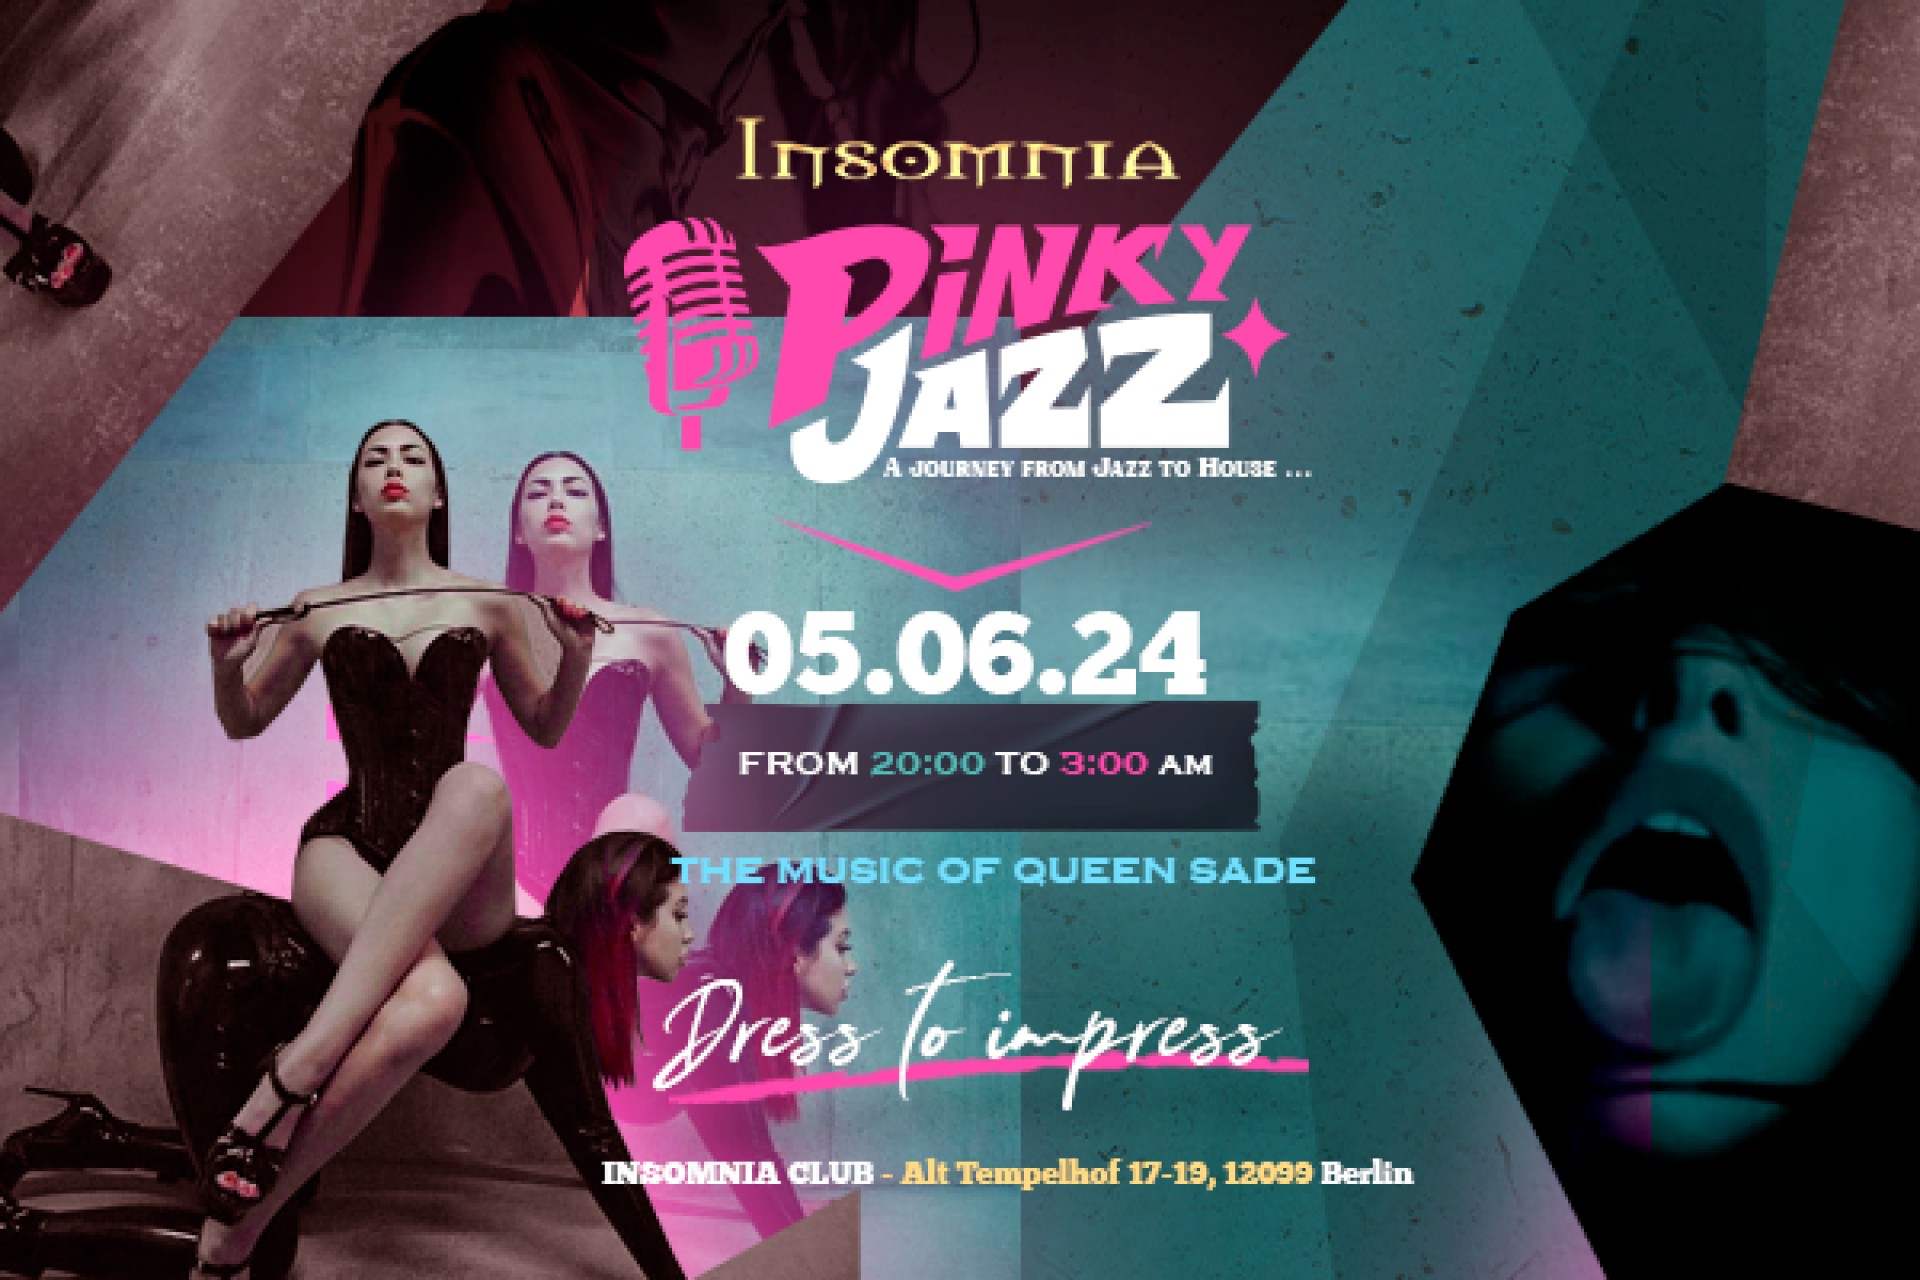 Pinky Jazz -  A Journey from Jazz to House